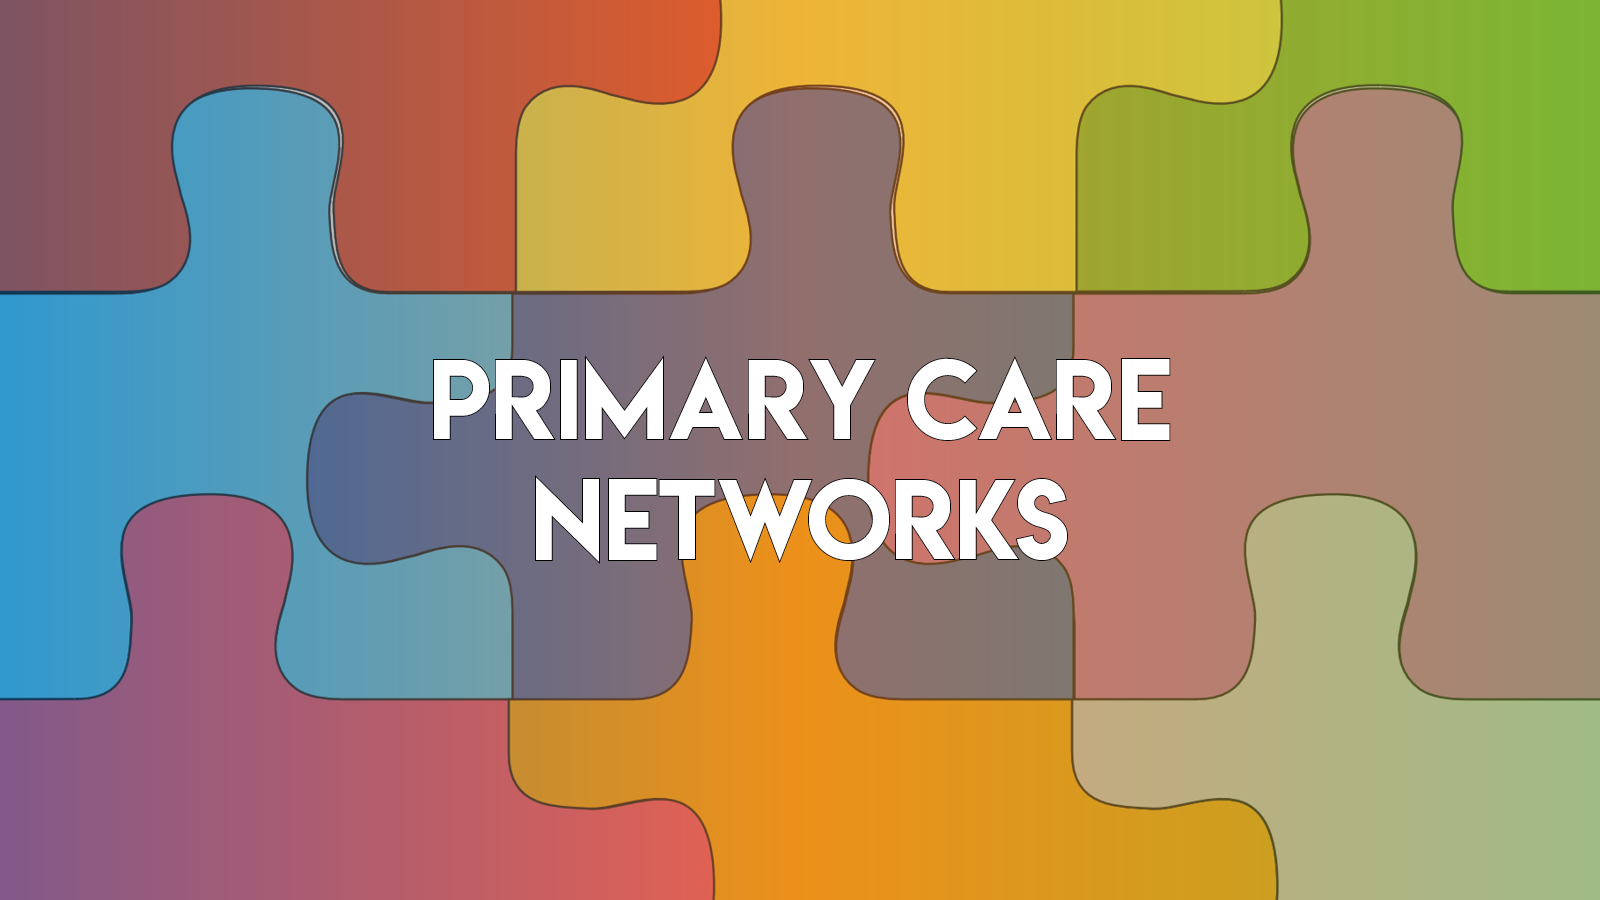 A multicoloured puzzle is shown with the words 'Primary Care Networks' across the front and centre